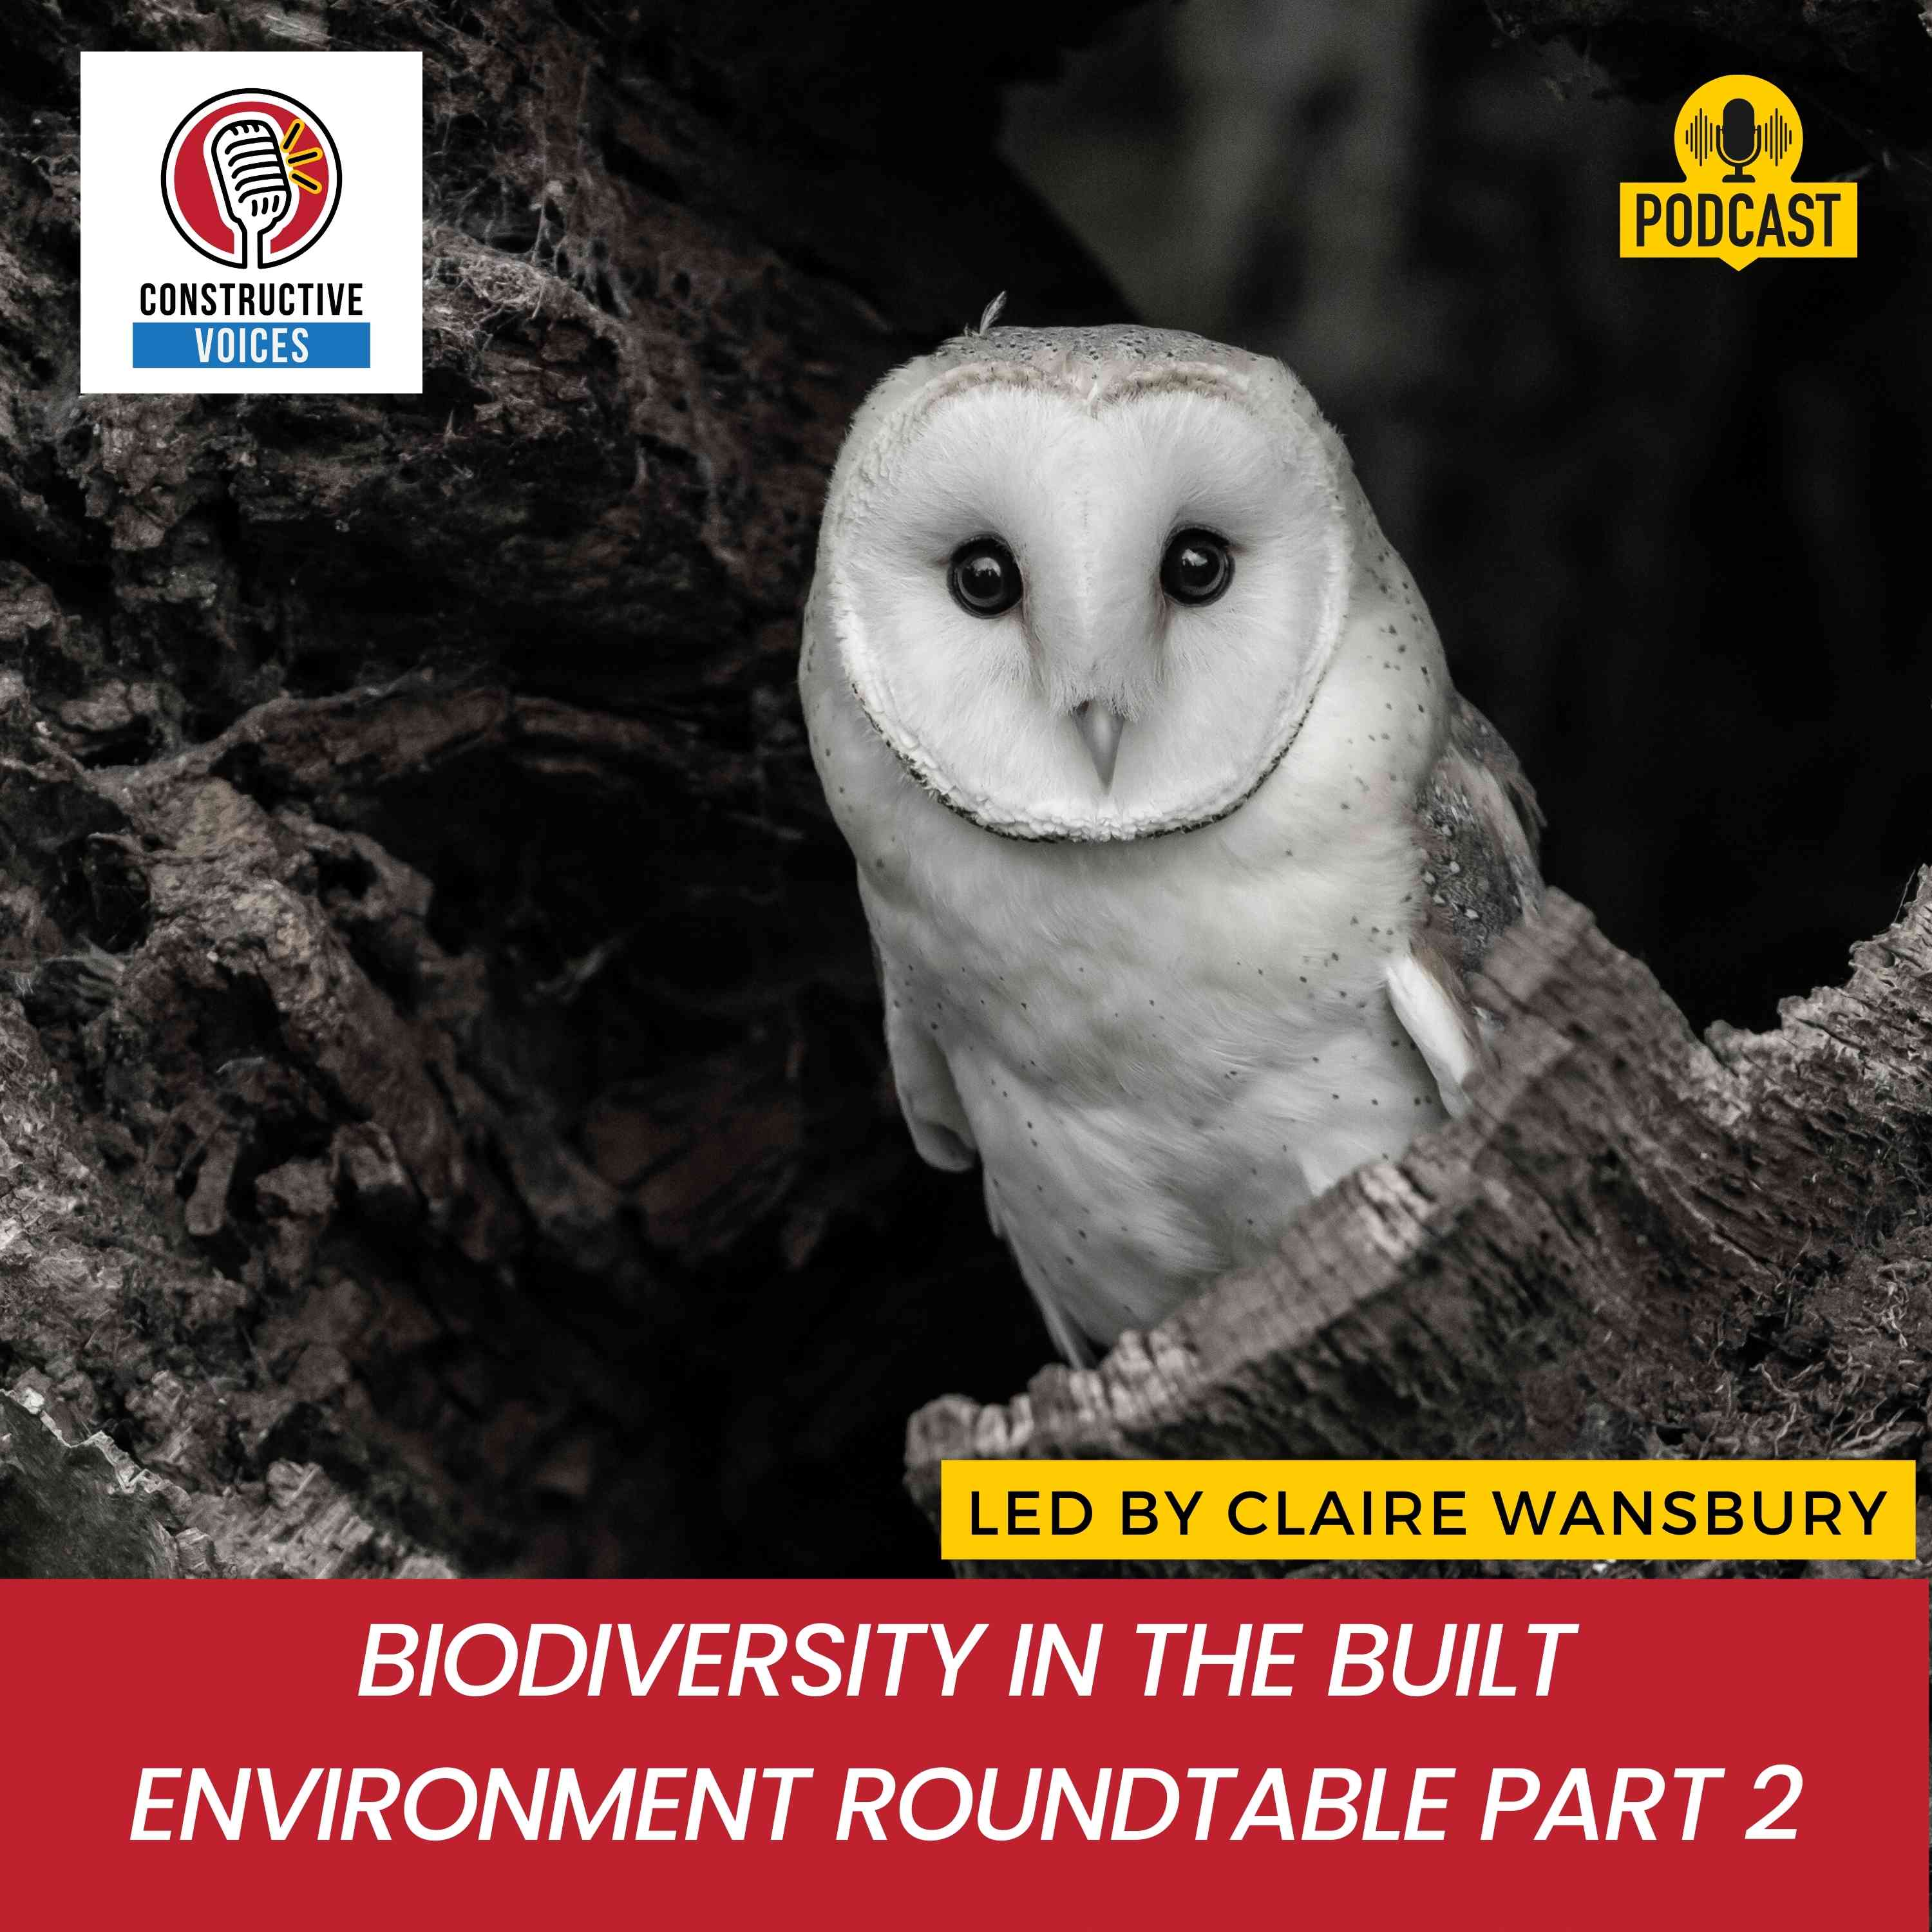 Biodiversity in the Built Environment Roundtable Part 2